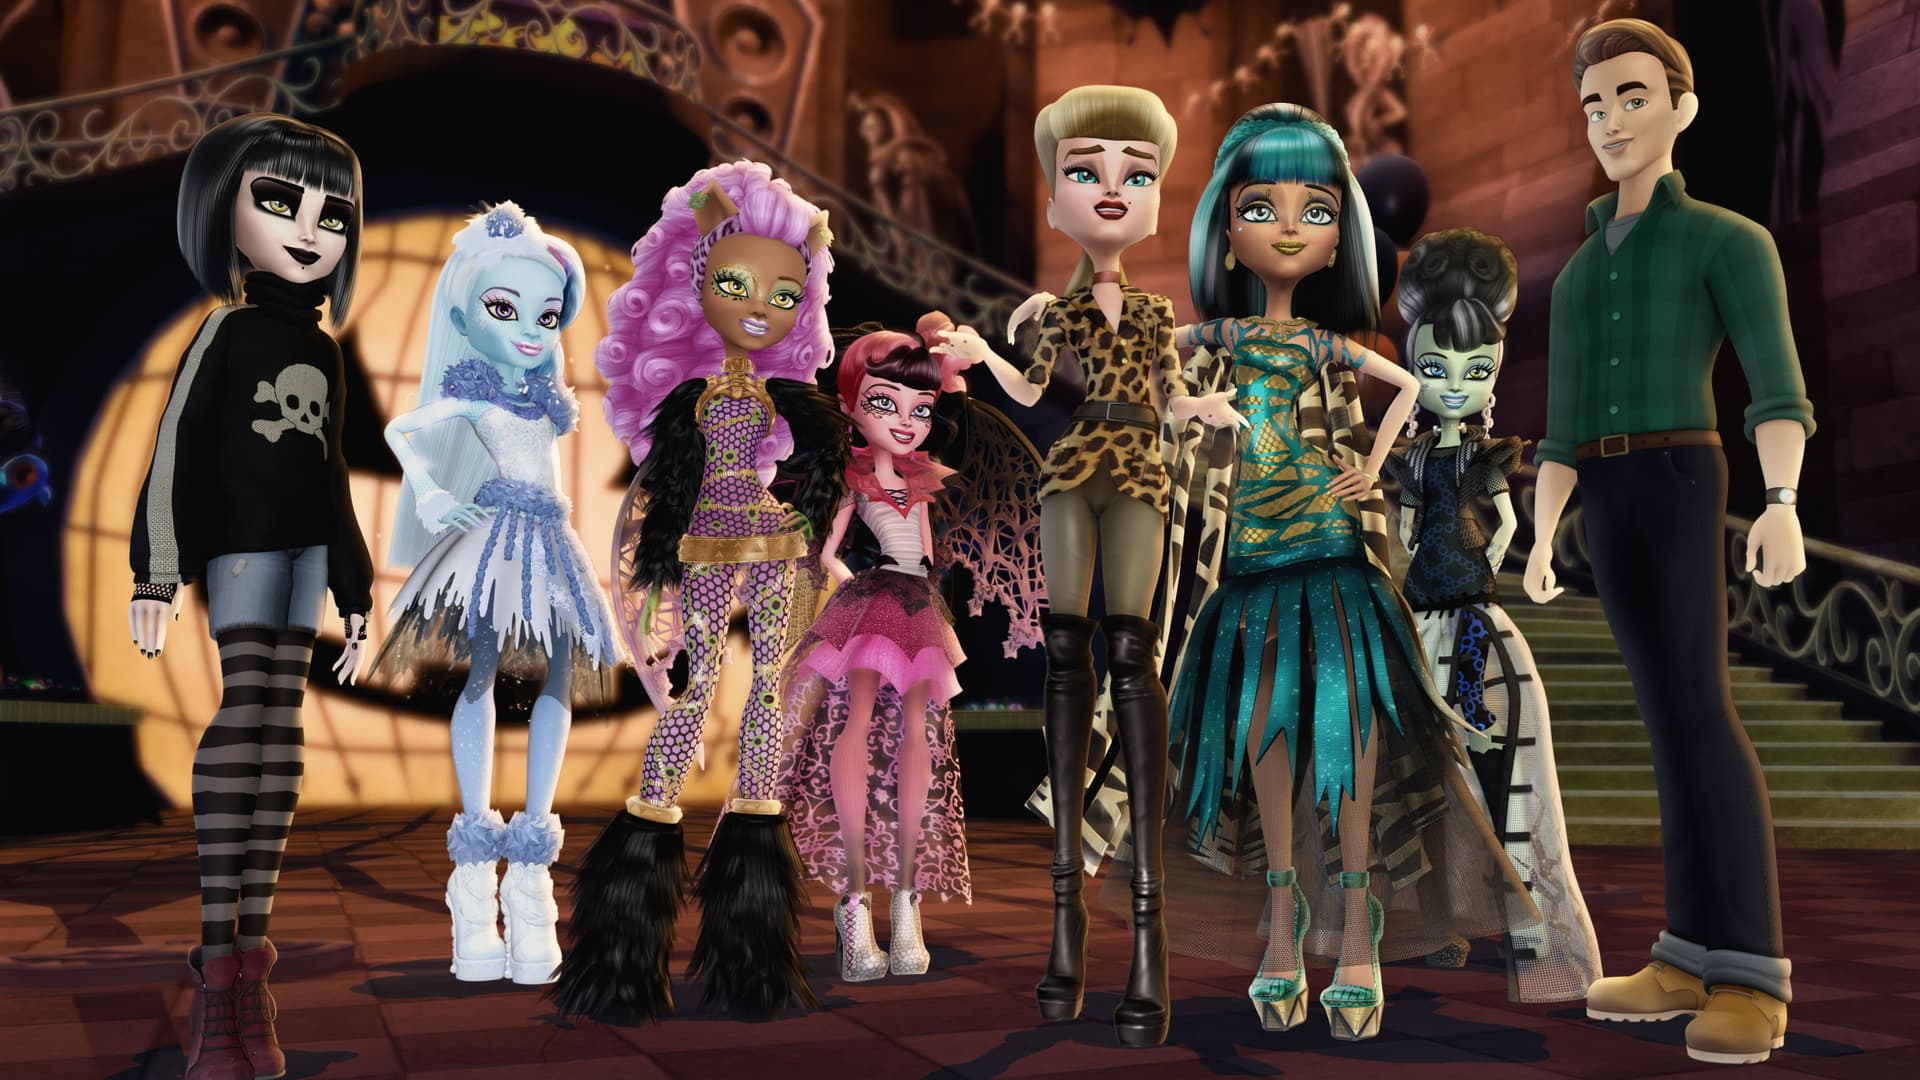 Monster High: Ghouls Rule – Filmes no Google Play